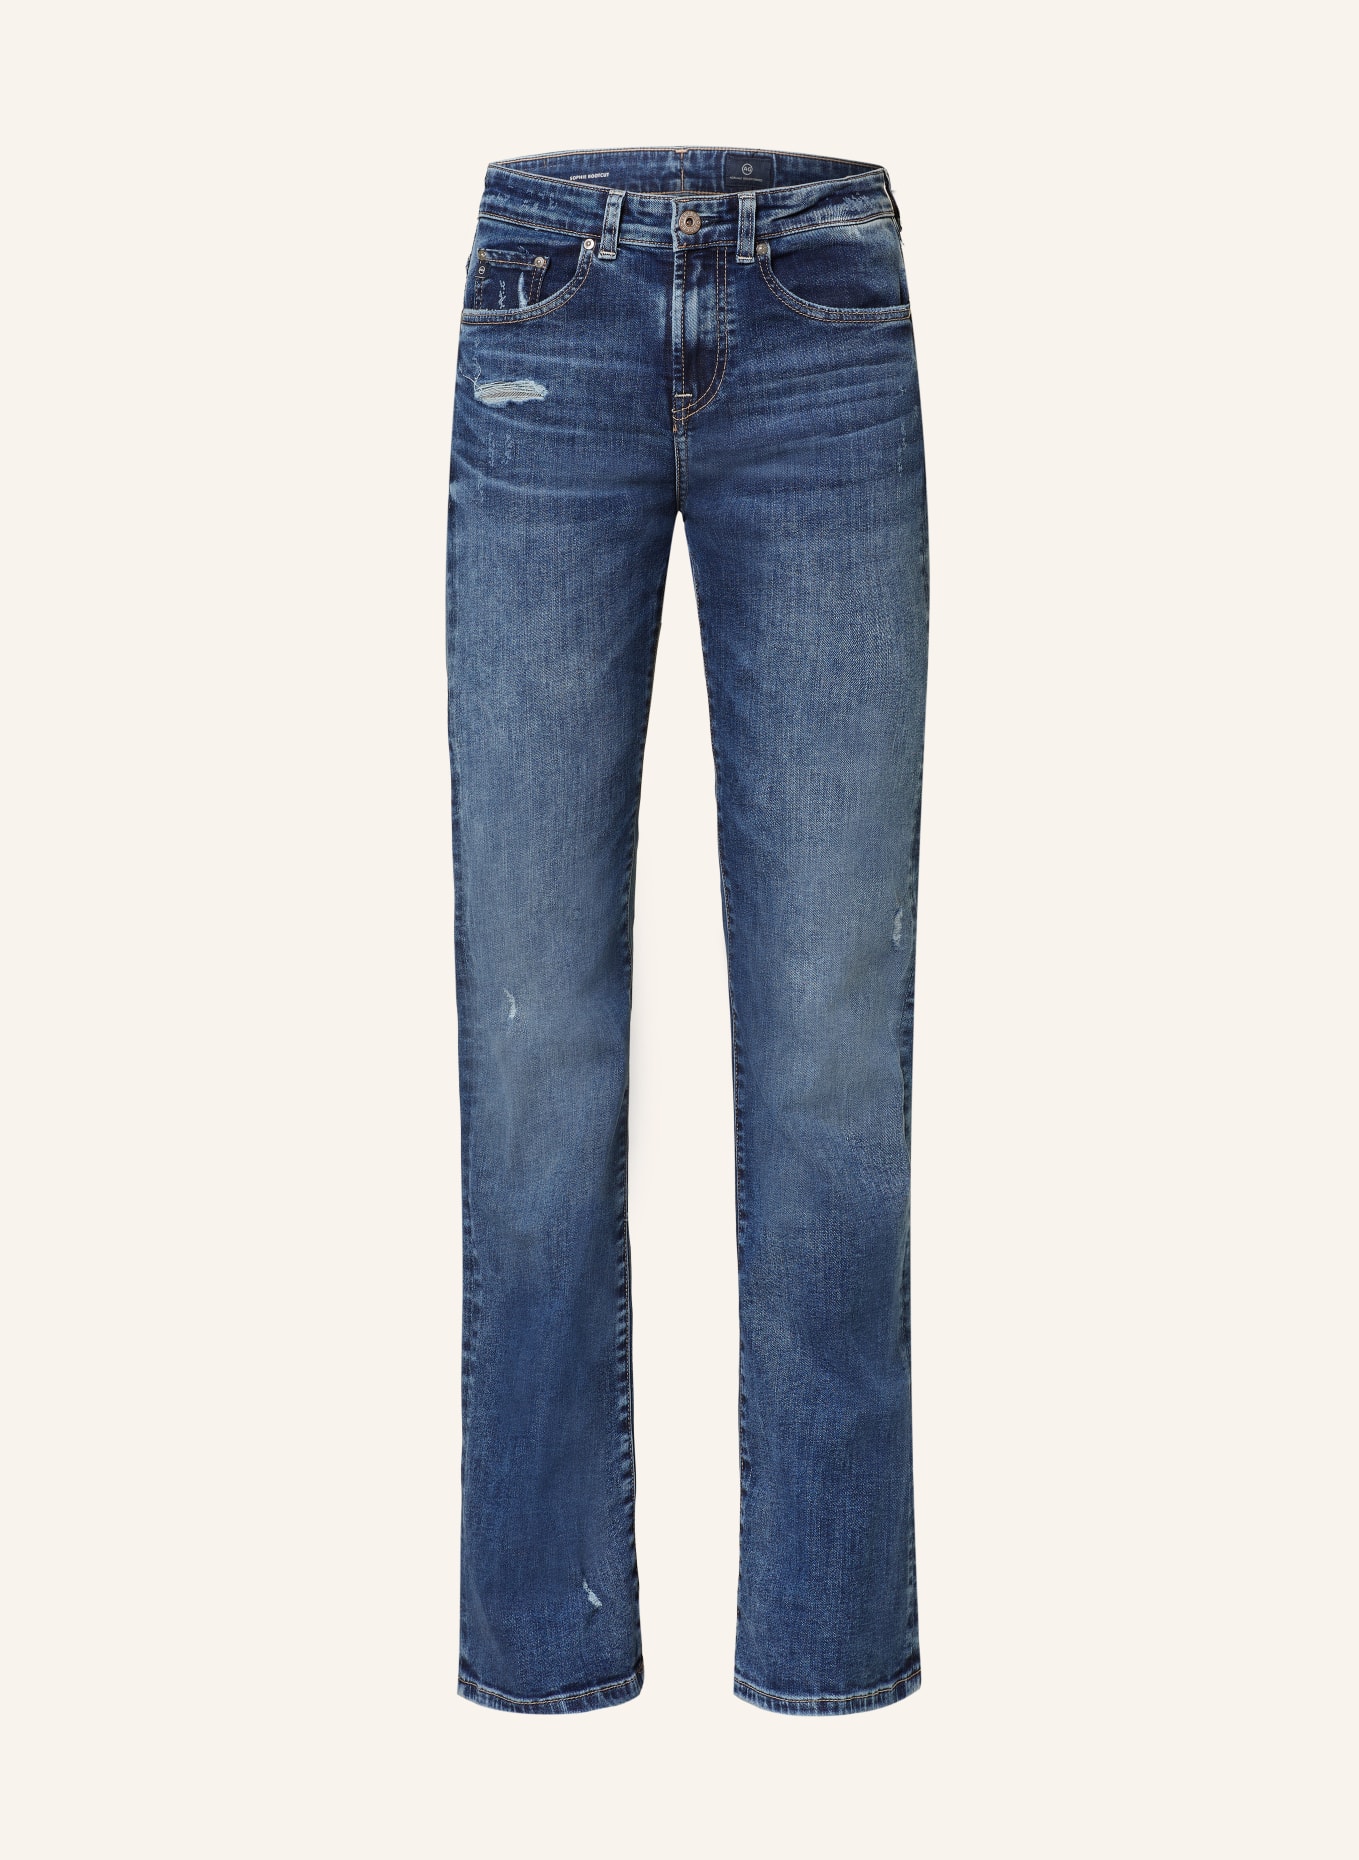 AG Jeans Bootcut Jeans SOPHIE, Farbe: 18BV MID BLUE WASHED (Bild 1)